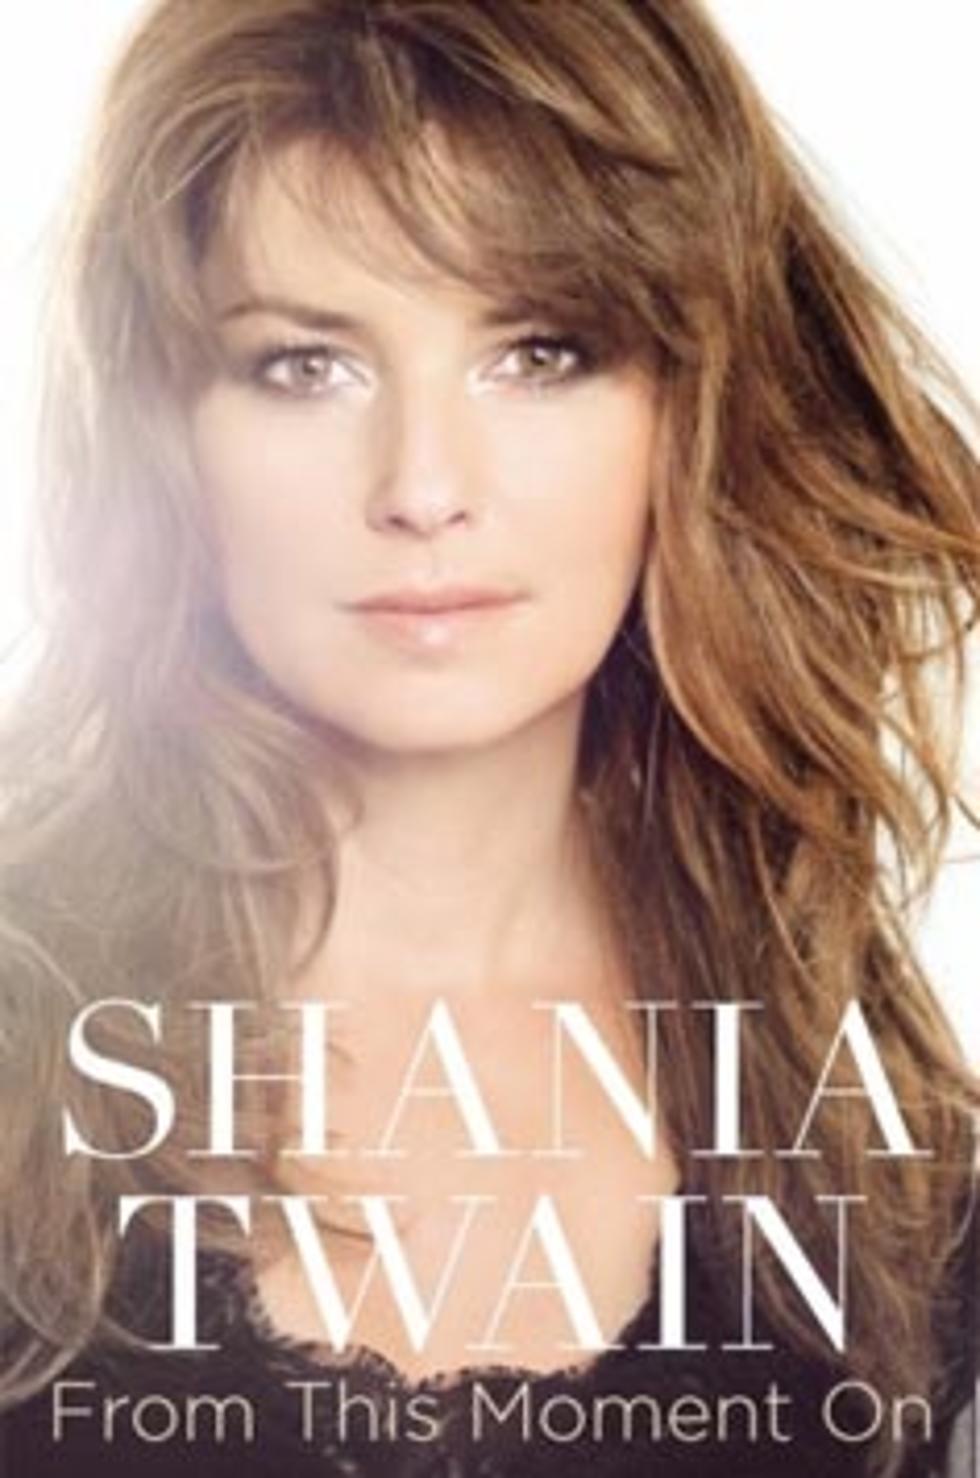 Shania Twain to Release Autobiography in May